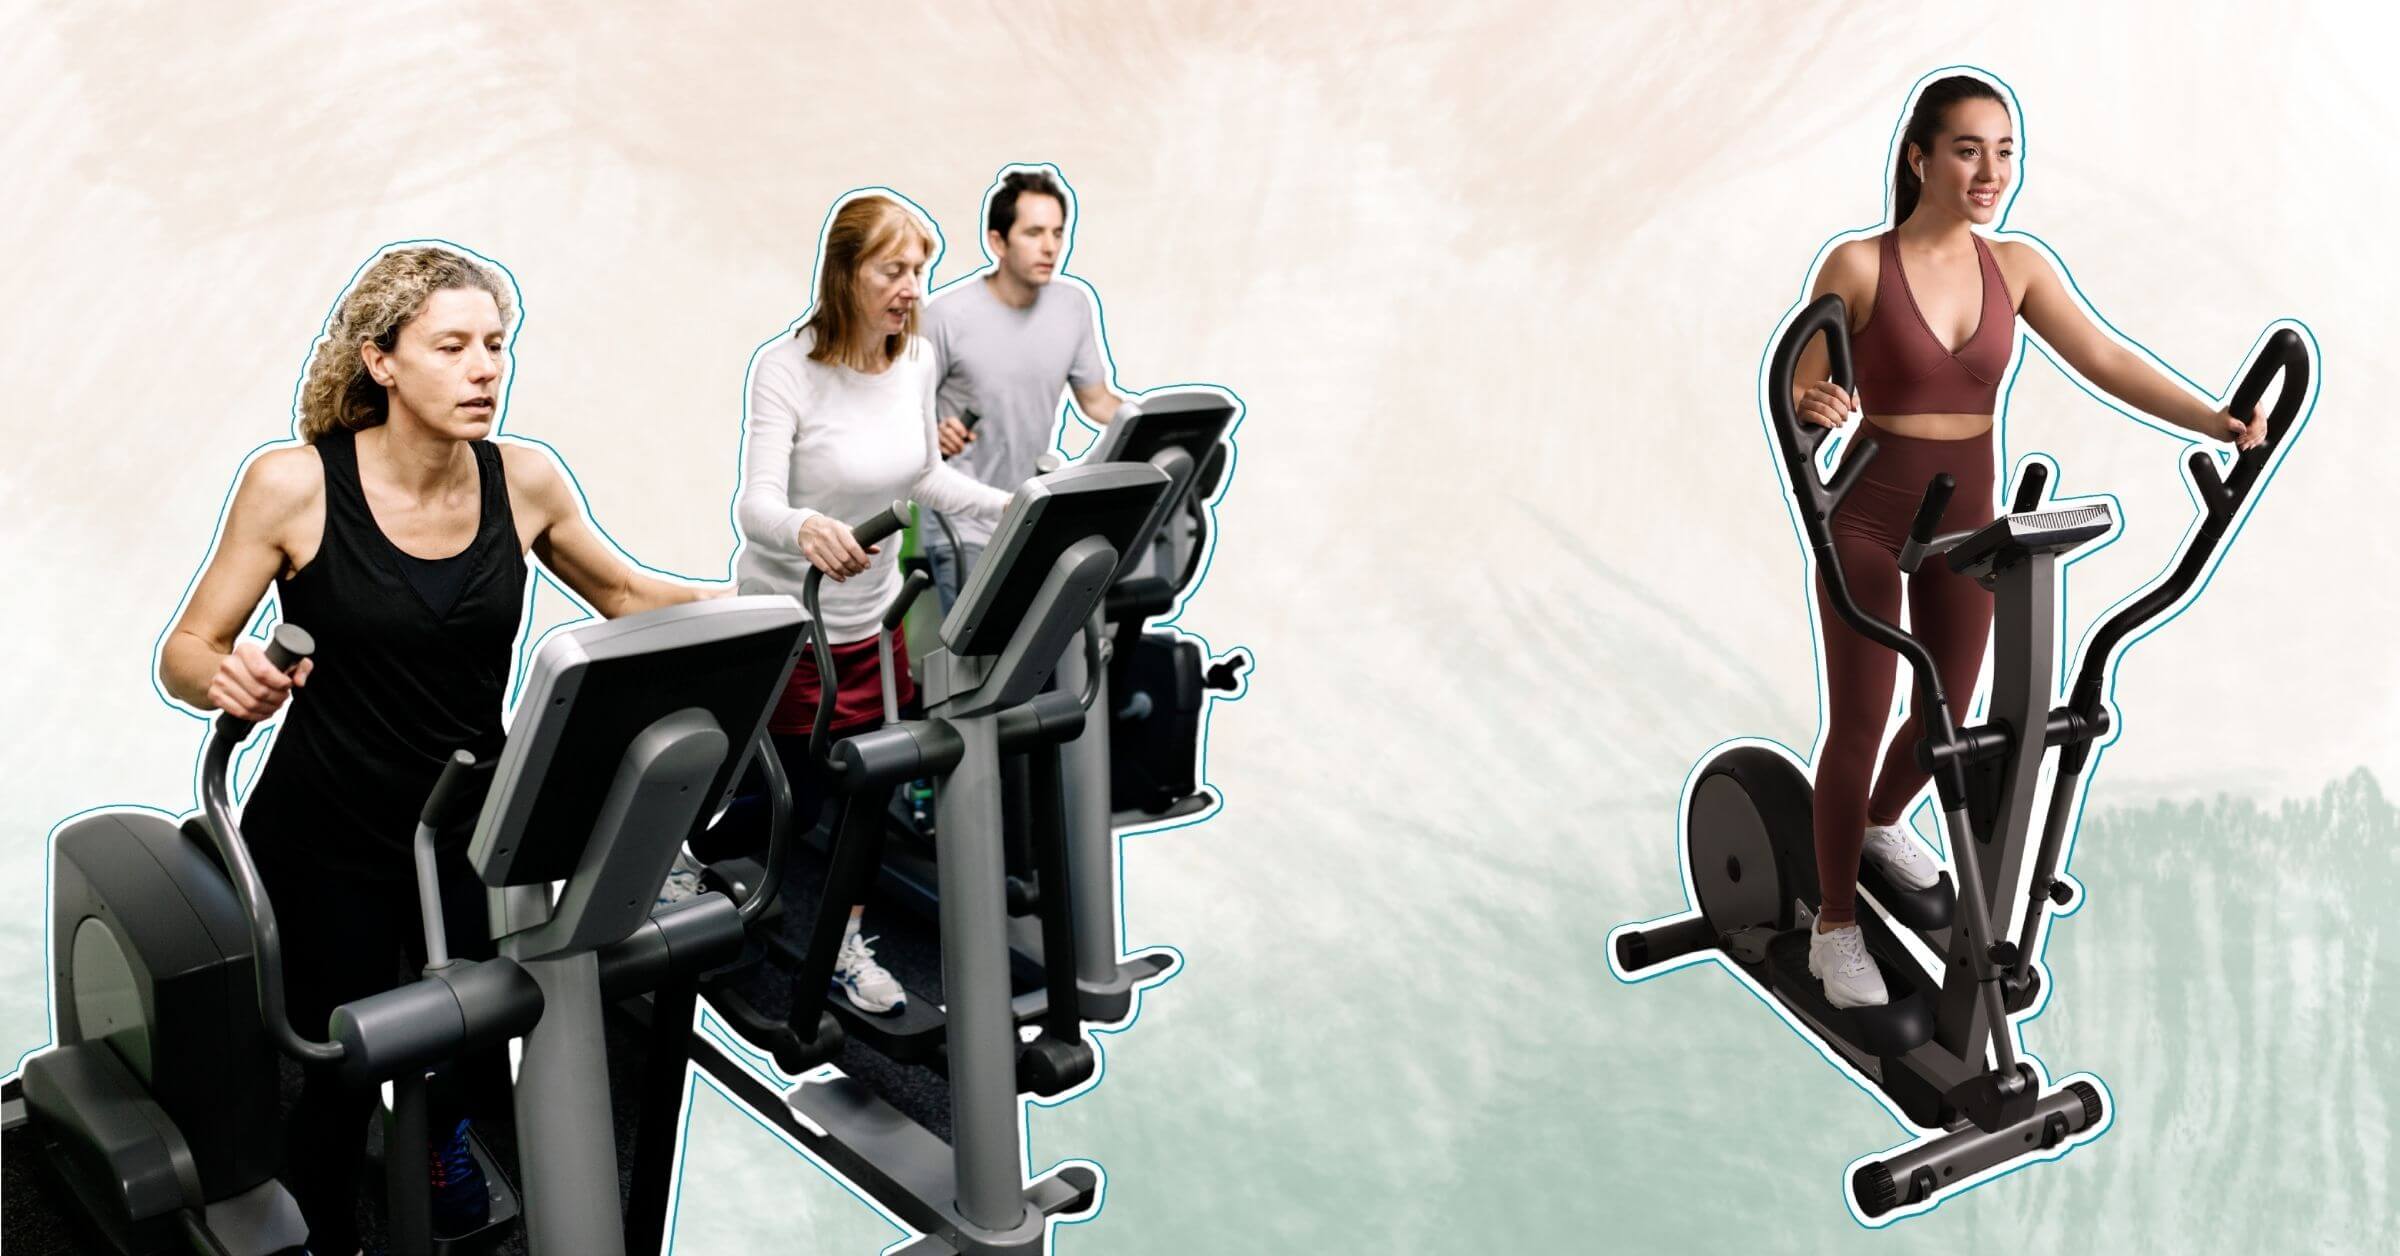 Can You Use an Elliptical Without Power